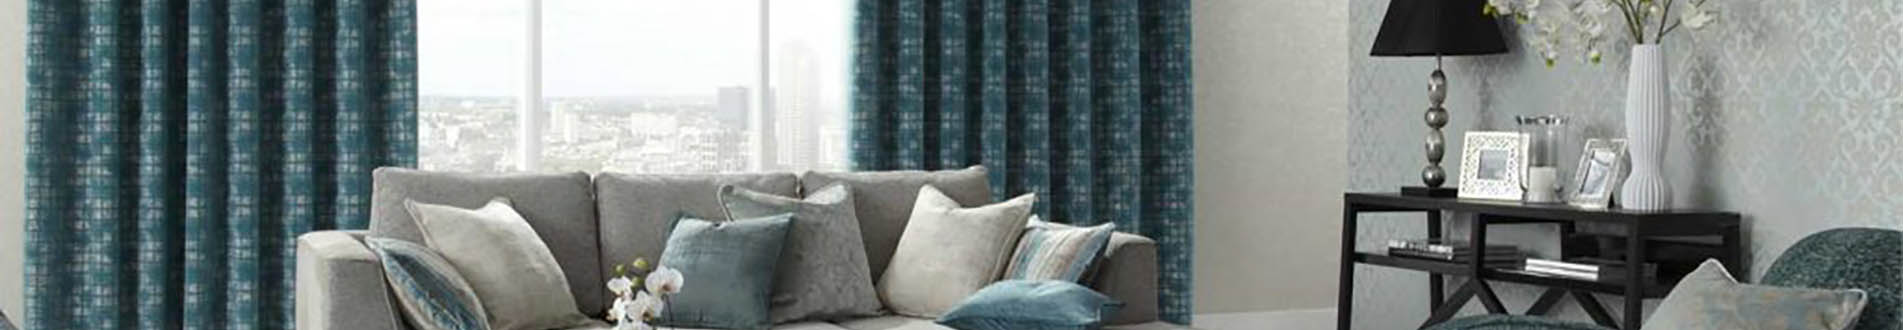 blue curtains and sofa